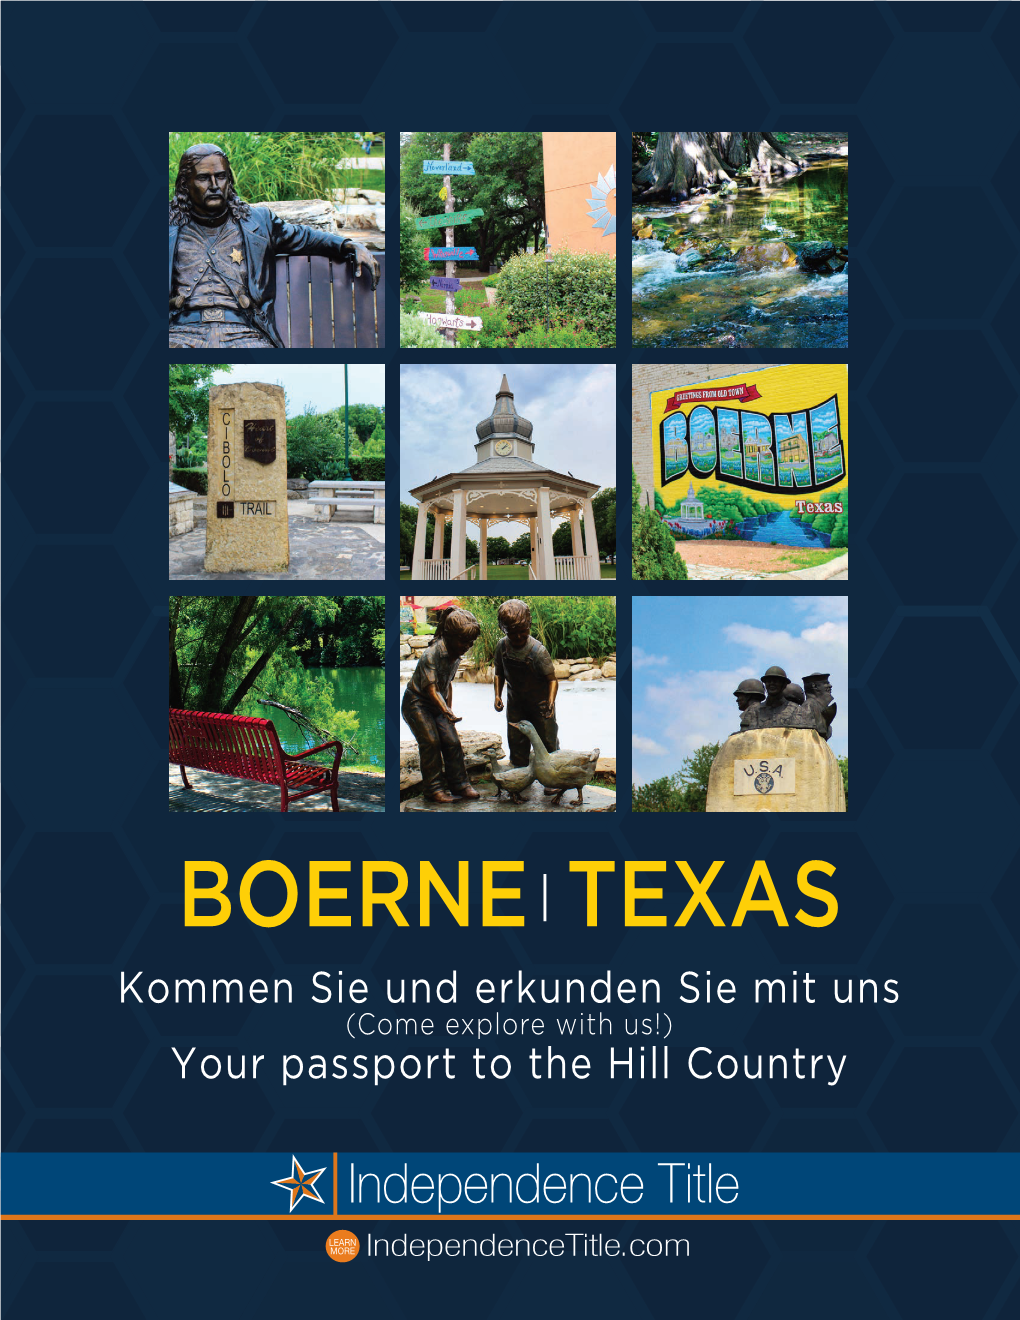 Boerne, Texas City of Boerne Ofﬁces Ci.Boerne.Tx.Us Cave Without a Name Cavewithoutaname.Com Tion.Com 402 E